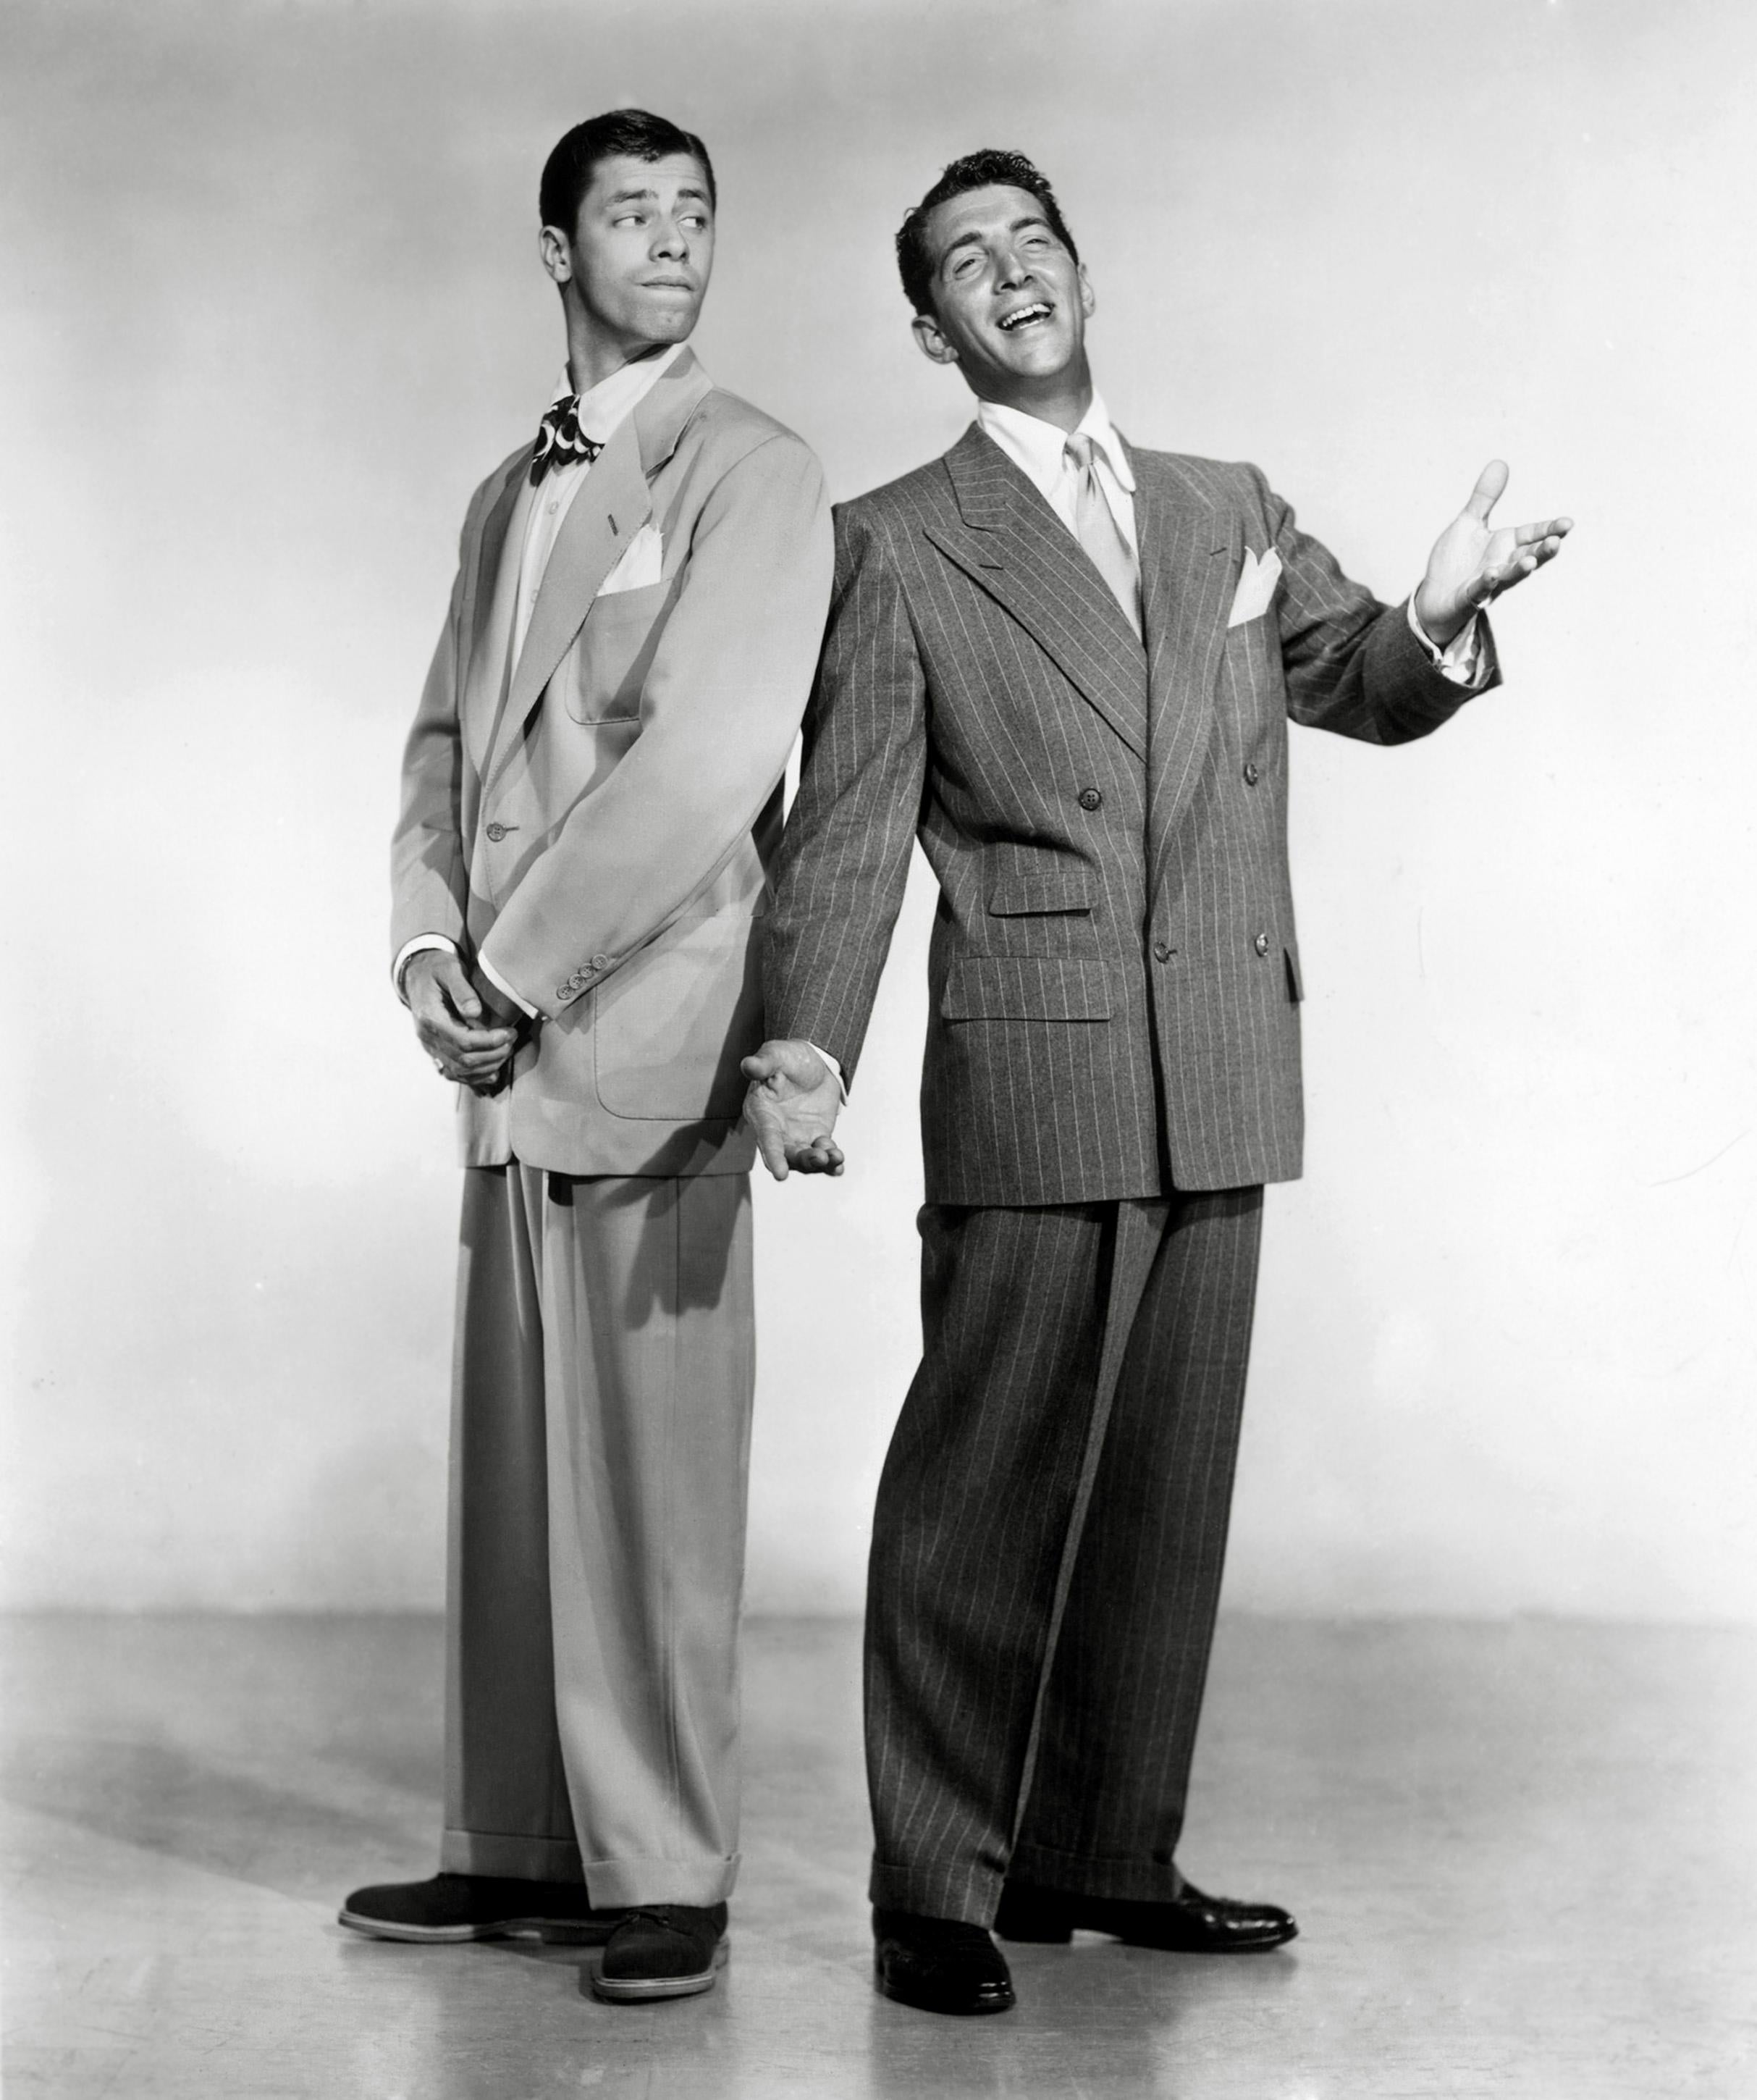 Unknown Portrait Photograph - Dean Martin and Jerry Lewis: The Comedy Duo Globe Photos Fine Art Print